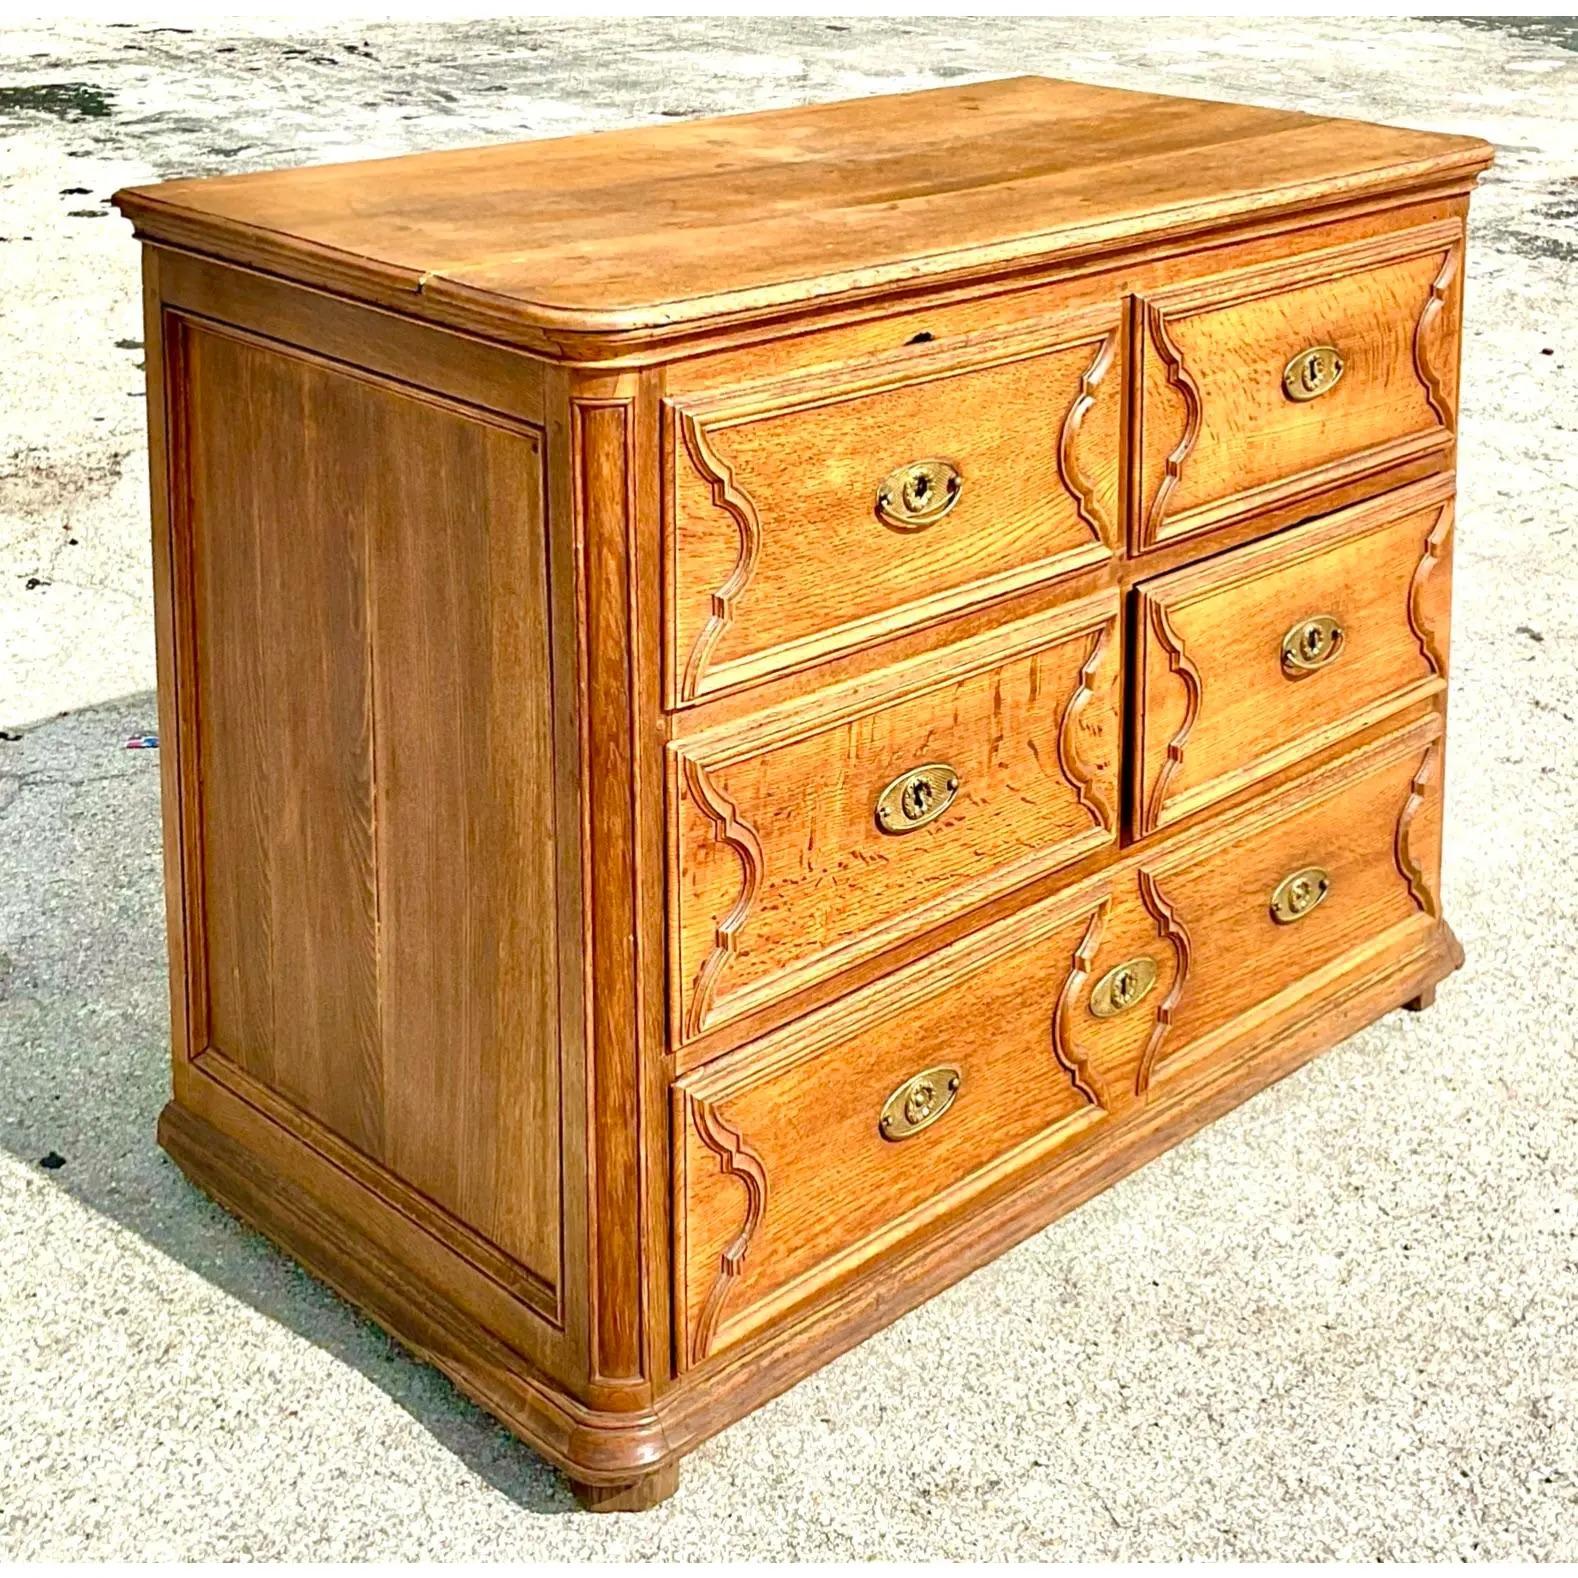 Fantastic vintage Boho English Georgian style Gentlemen’s chest of drawers. Beautiful hand carved detail on a large and impressive cabinet. Acquired from a Palm Beach estate.